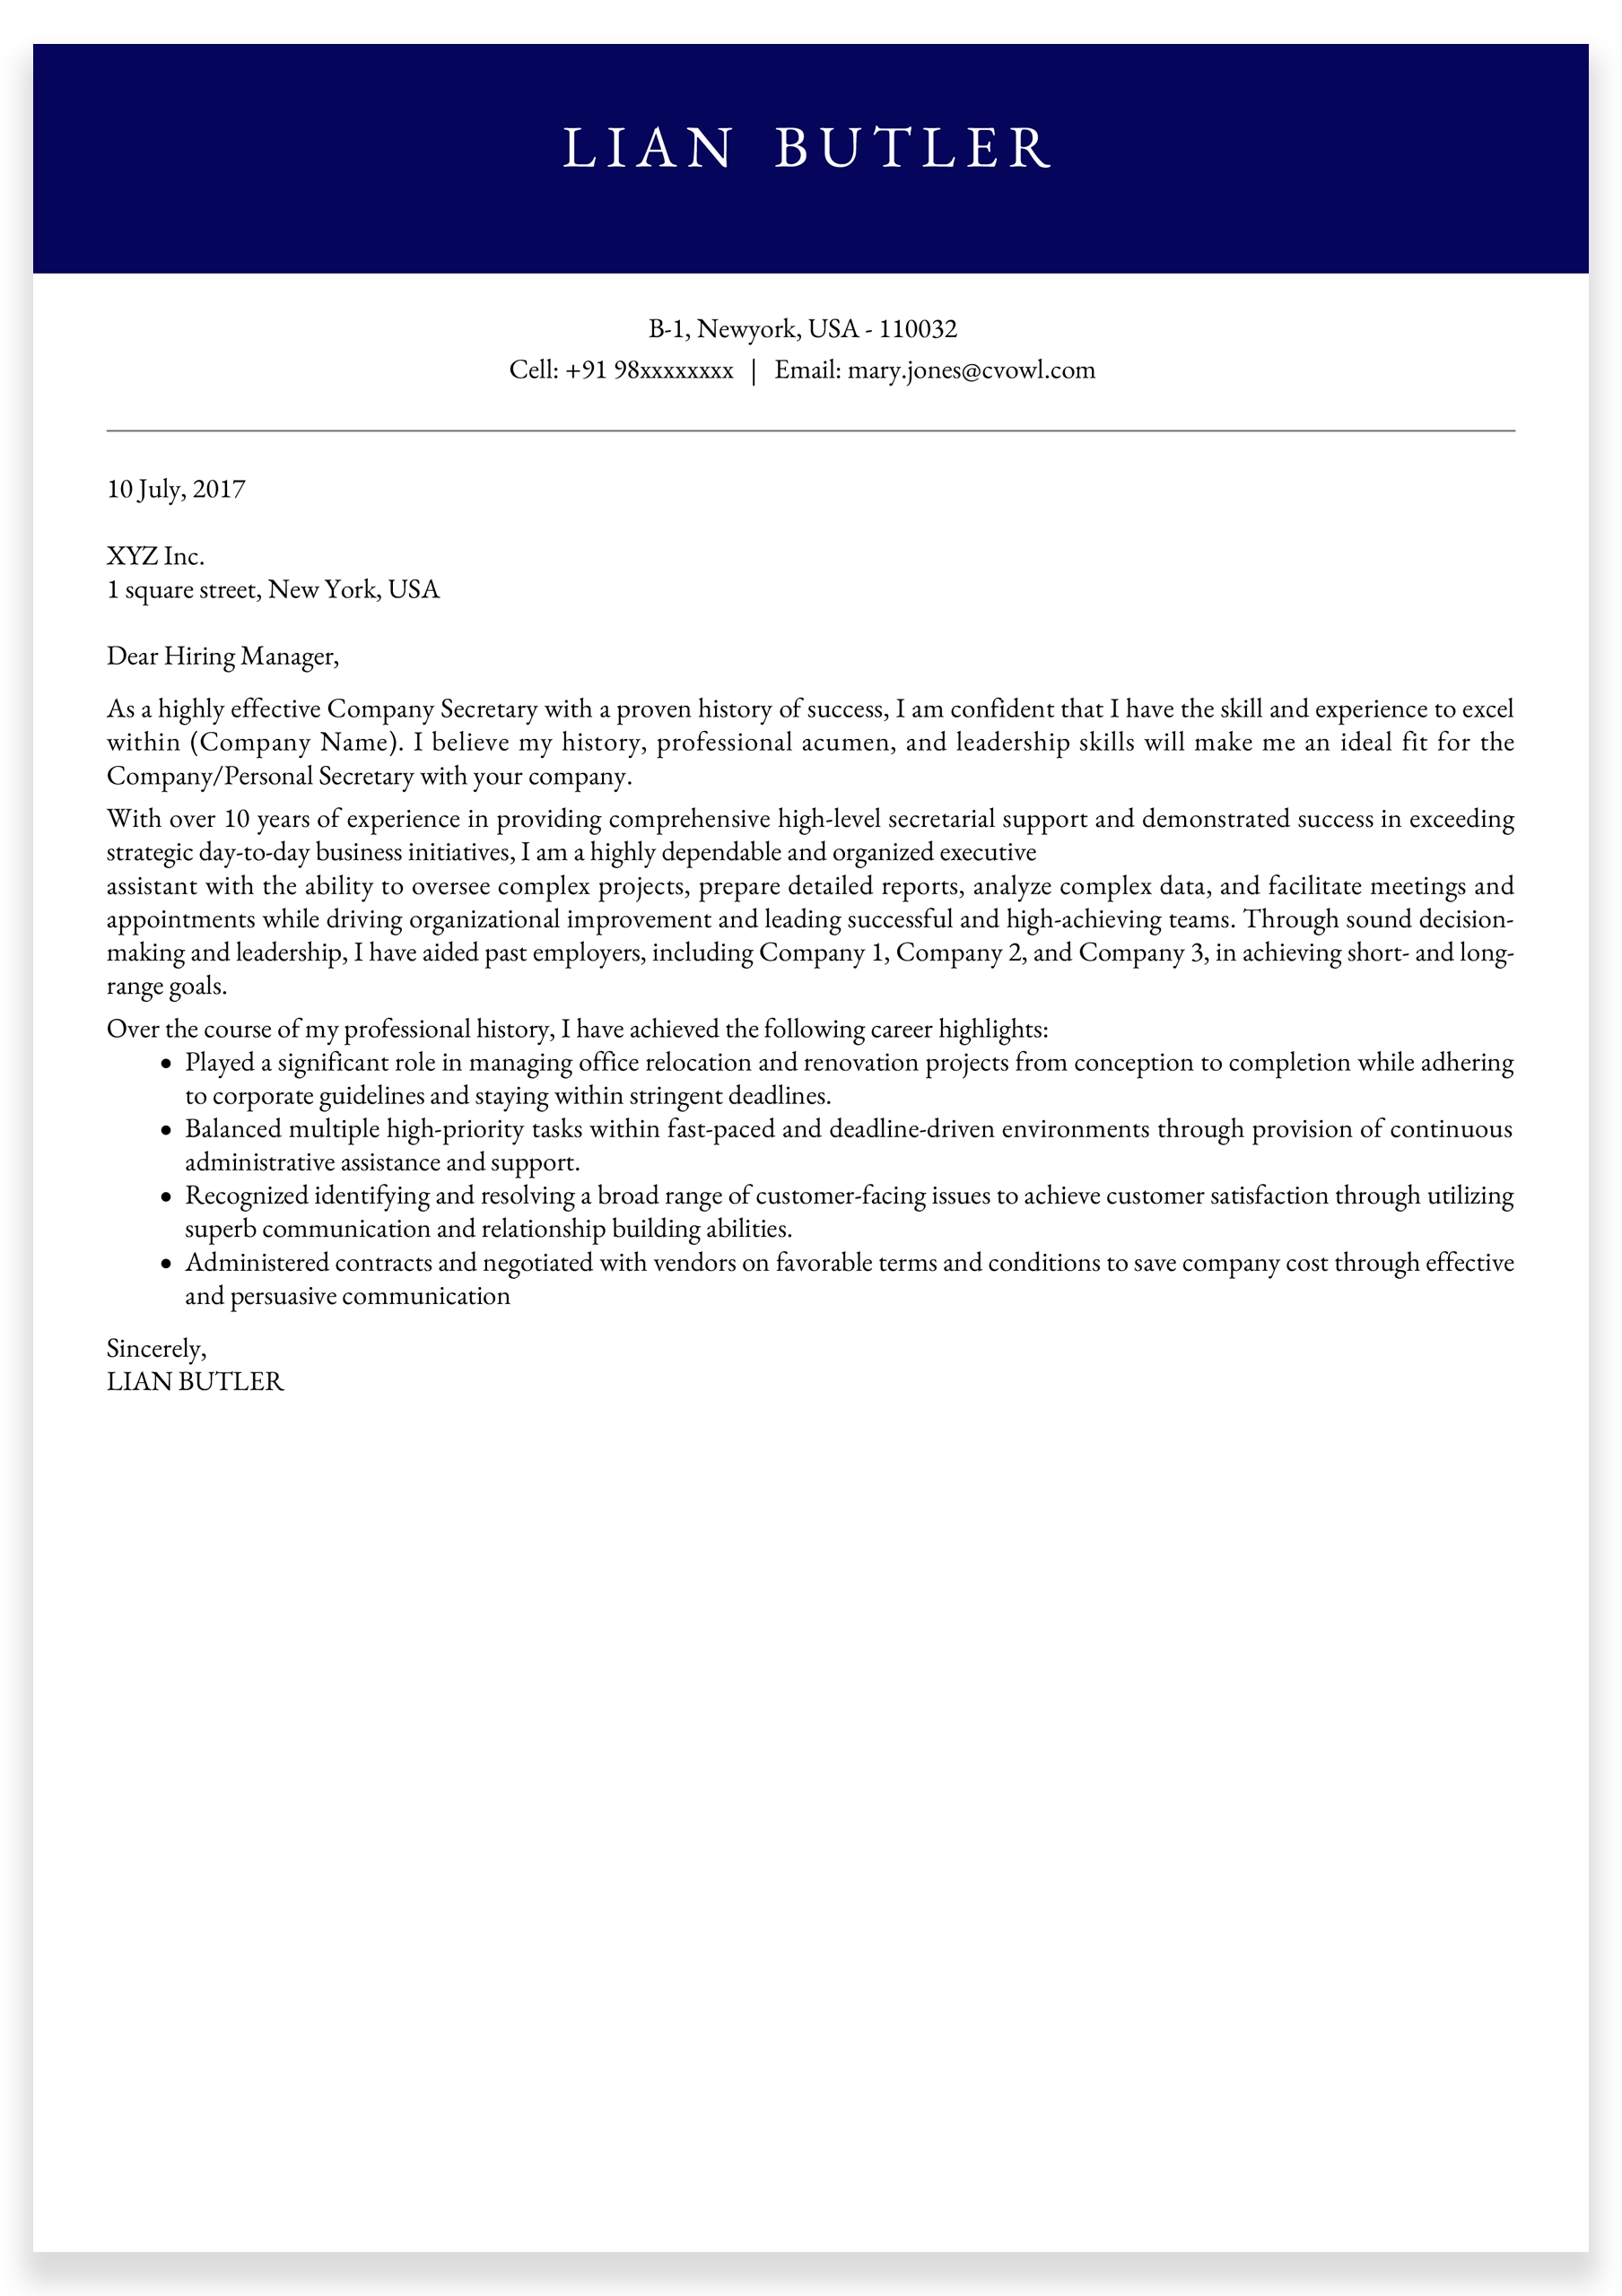 Financial-Accountant-Cover-Letter-sample8